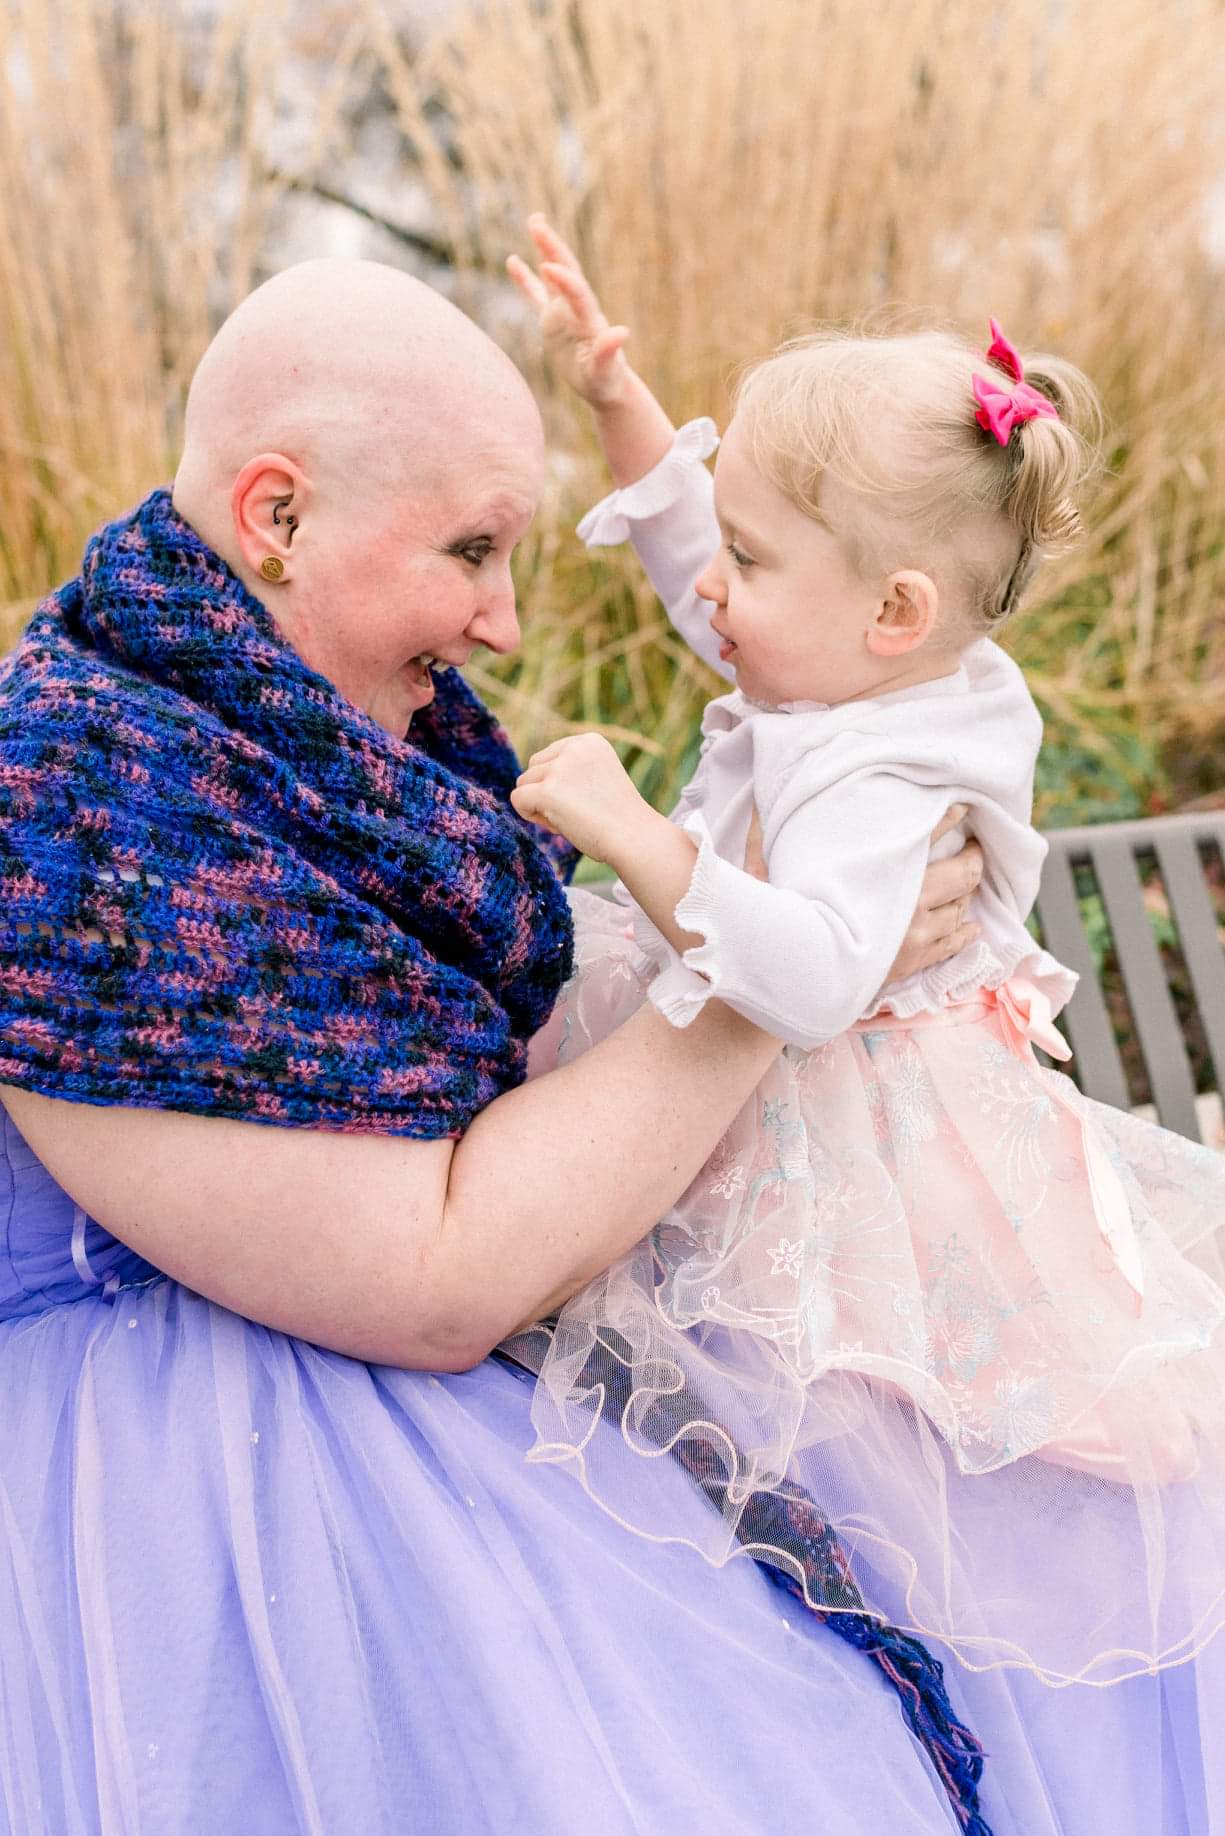 Cancer survivor picture sitting in a purple gown with her little girl in a little pink dress.